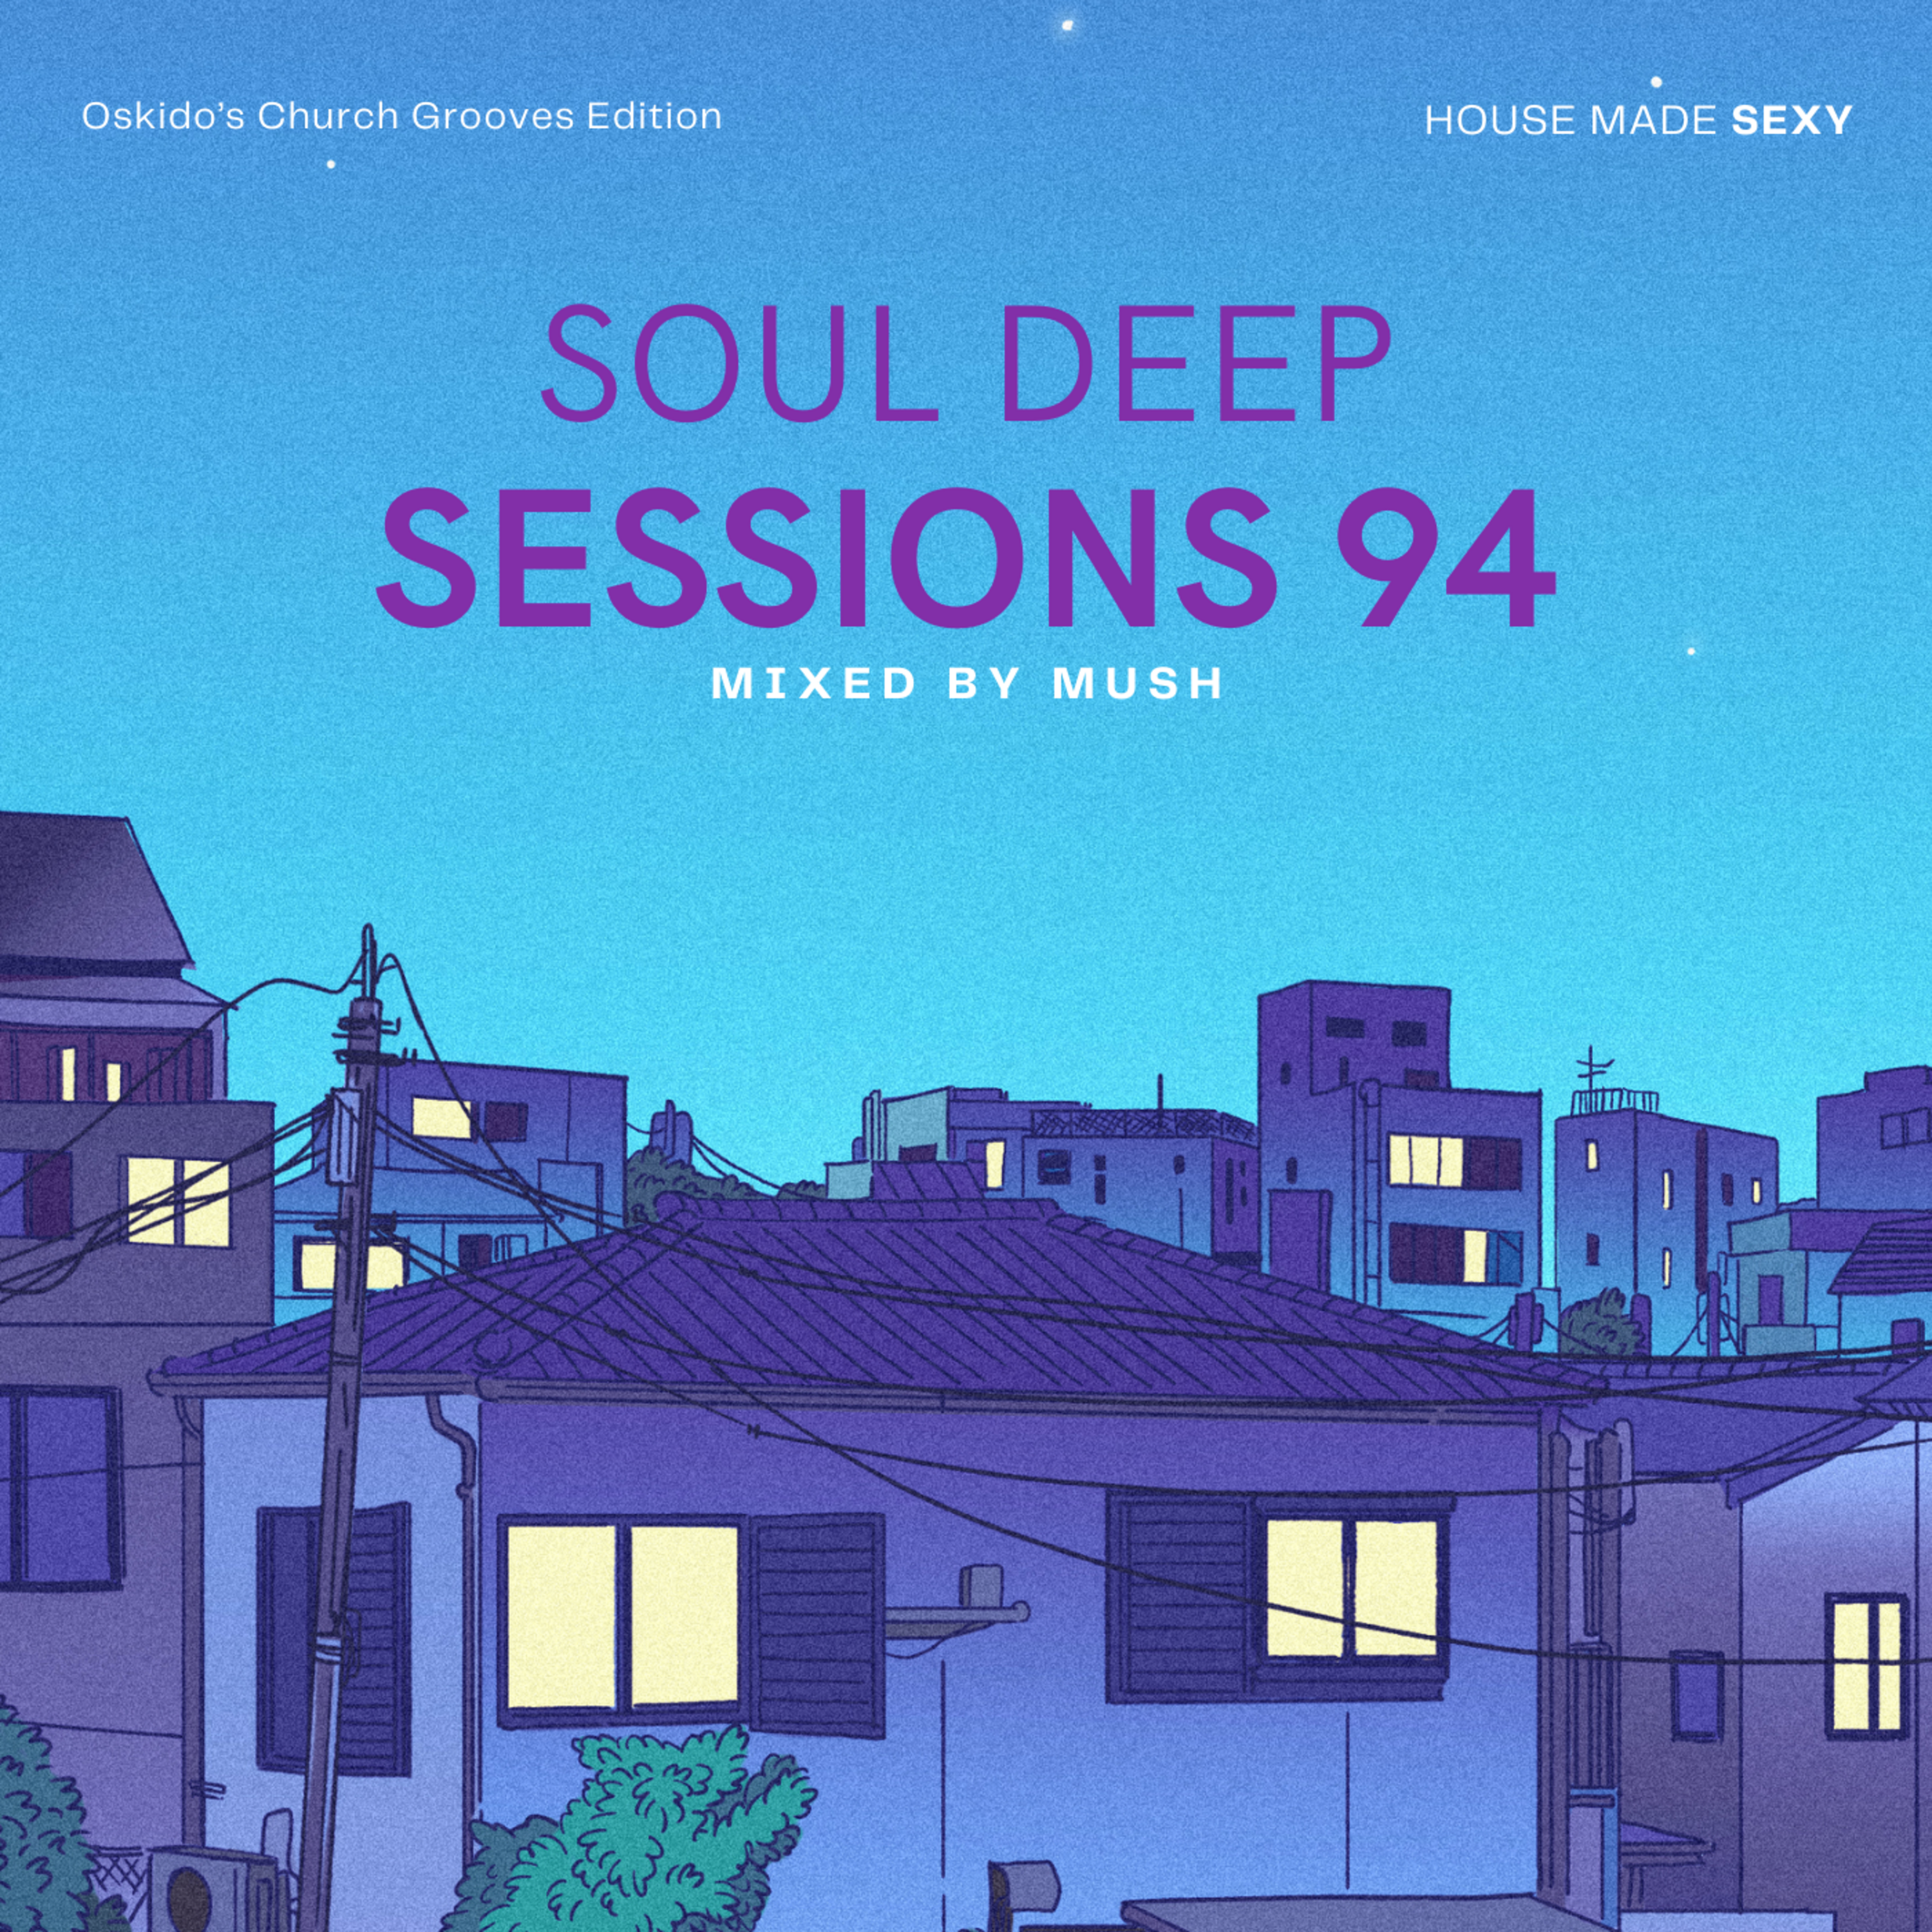 Black Podcasting - Episode 94: Soul Deep Sessions 94 mixed by Mush